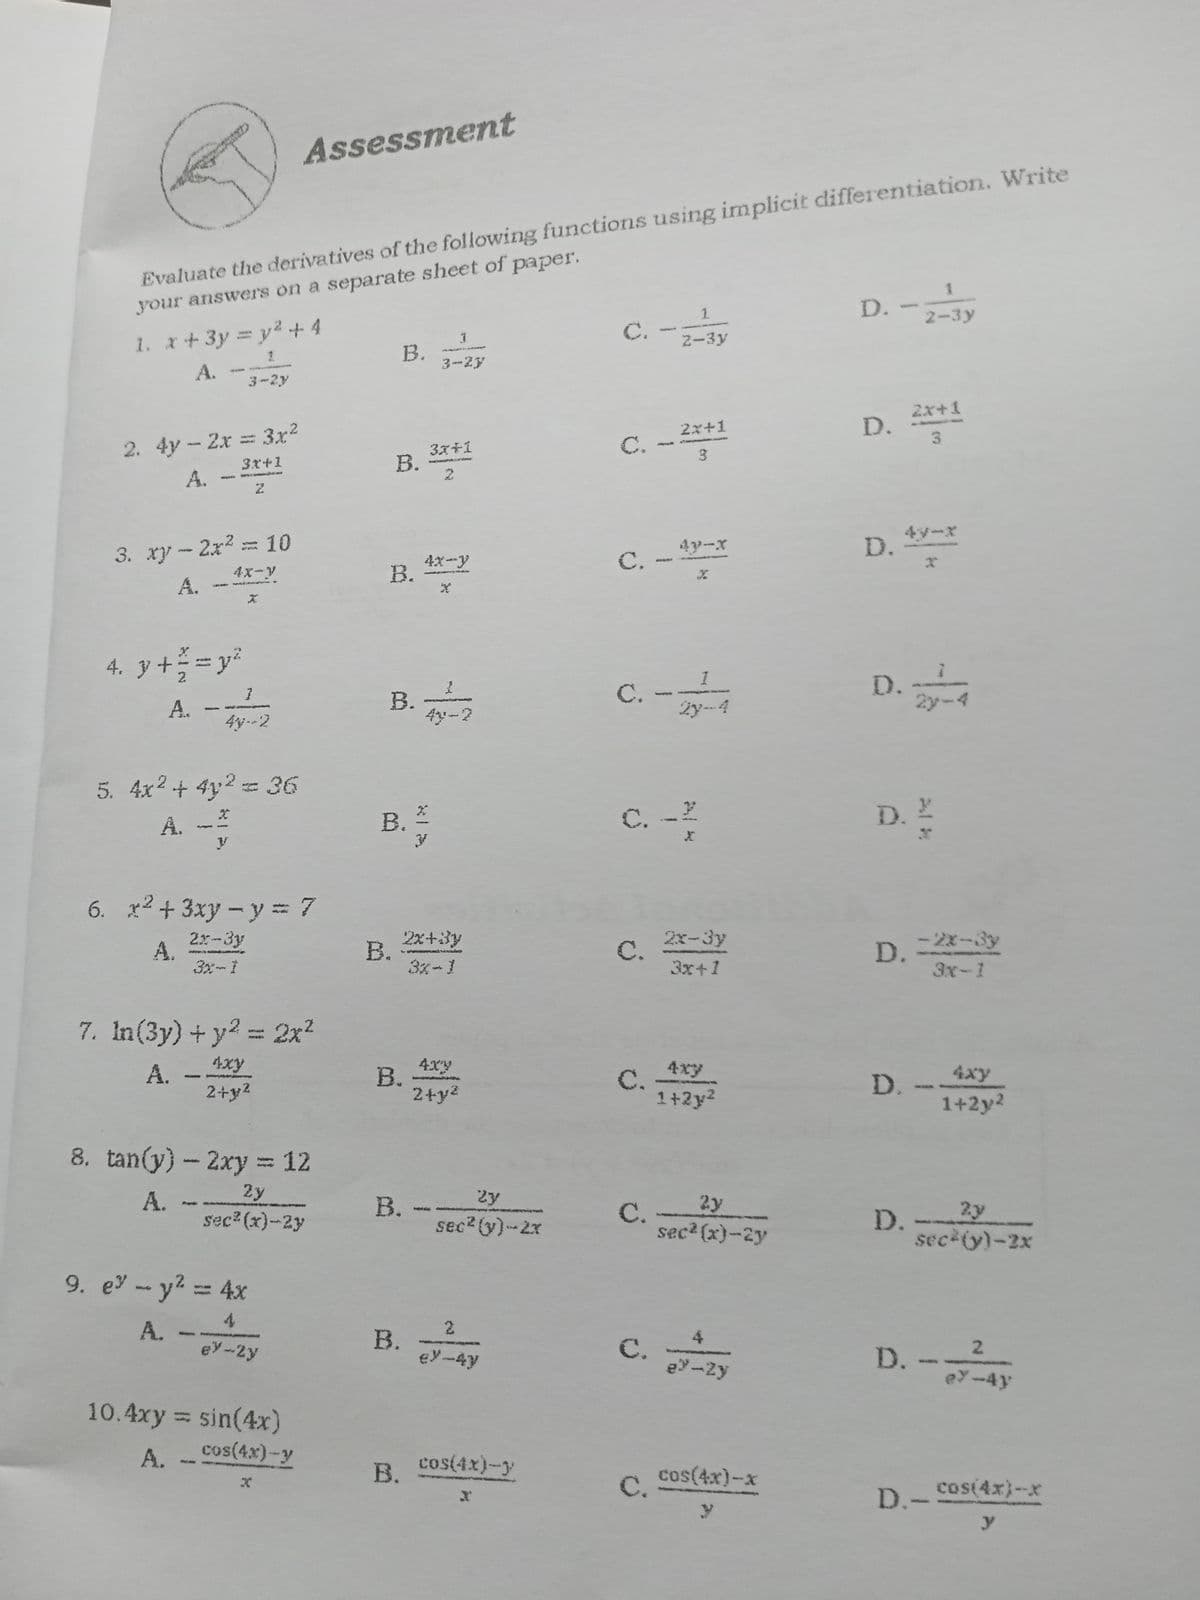 Assessment
Evaluate the derivatives of the following functions using implicit differentiation. Write
your answers on a separate sheet of paper.
1.
D.
2-3y
C.
2-3y
1. x+3y y2.+ 4
В.
3-2y
A.
3-2y
2x+1
2. 4y-2x 3x2
A.
2x+1
C. --**
3.
3x+1
B. *
3.
3x+1
2.
3. xy-2x2 10
4x-y
4y-x
D.
4y-x
4x-y
В.
C.
A.
.
4. y += y
D.
1
В.
4y-2
С.
Ży-4
A. -
2yーマ
4y--2
5. 4x2+ 4y2= 36
A. -
C. -?
D. '
6. x2+ 3xy – y = 7
2x-3y
A.
2x+3y
B.
3x-1
2x-3y
C.
3x+1
-2x-3y
D.
3x-1
7. In(3y) + y? = 2x2
A. -
2+y2
4xy
4xy
В.
4xy
C.
1+2y2
4xy
D.
1+2y2
2+y2
8. tan(y)- 2xy 12
2y
2y
B. --
sec (y)-2x
A. -
C.
2y
2y
sec (x)-2y
D.
sec? (x)-2y
sec (y)-2x
9. e -y2= 4x
4
В.
A.
2.
4
C.
e-Zy
D.-
ey--2y
ey-4y
2.
eY-4y
10.4xy = sin(4x)
A. -
cos(4x)-y
В.
cos(4x)-y
cos(4x)-x
C.
D.-Cos(4x)-xr
y
B.
